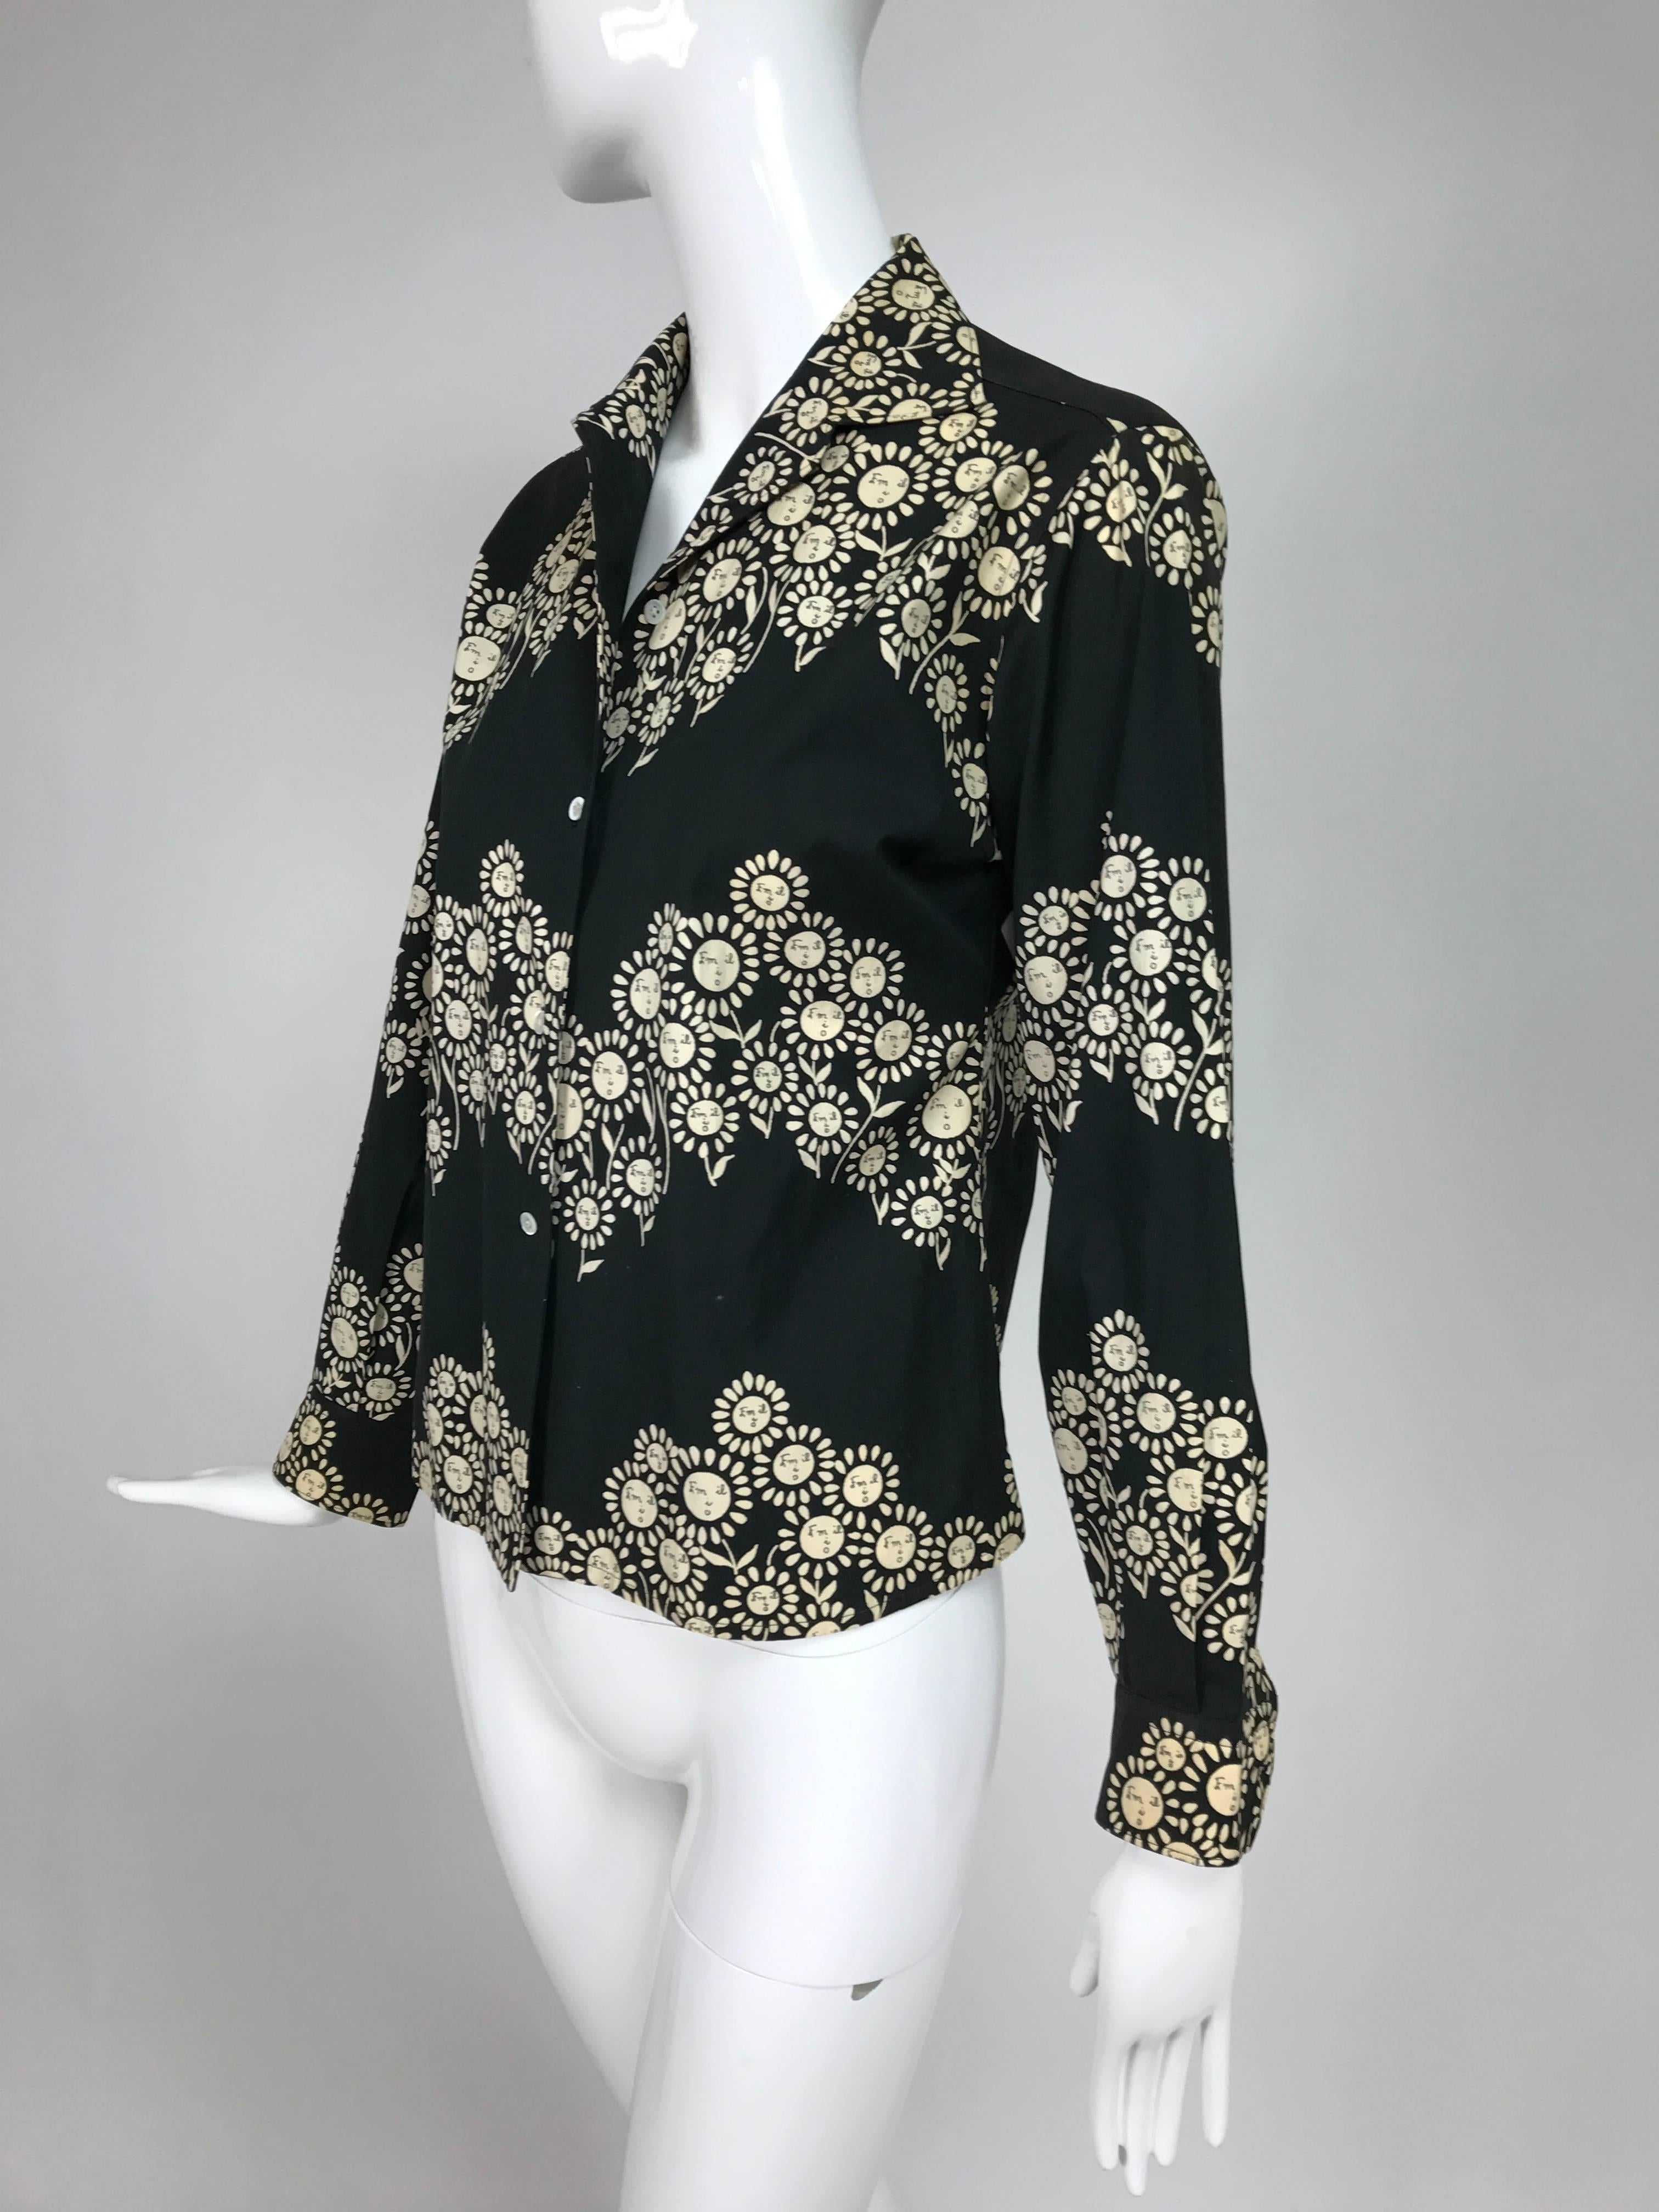 Rare vntage Emilio Pucci black and white cotton floral blouse 1950s...Button front black cotton blouse with a very unusual print in white, looks like a daisy, but the Emilio signature looks like a face...Long sleeves with button cuffs, button front